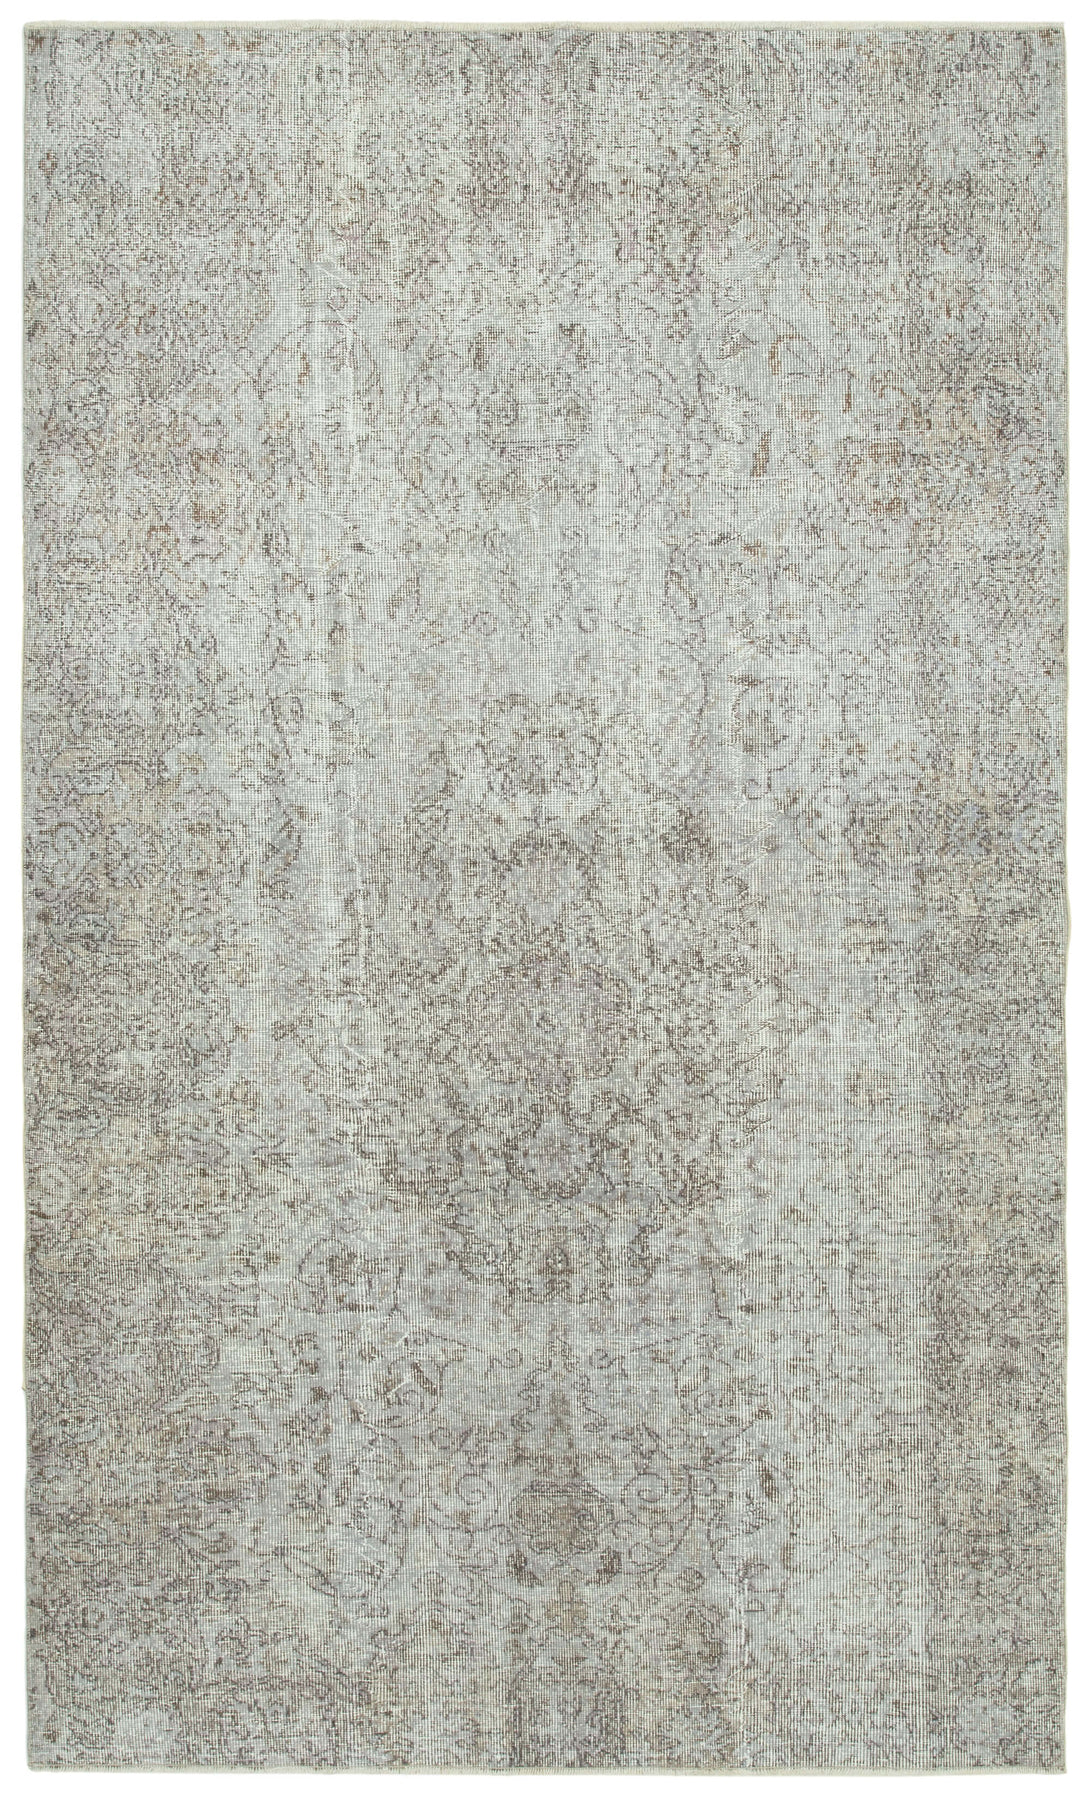 Handmade Overdyed Area Rug > Design# OL-AC-34775 > Size: 5'-4" x 8'-8", Carpet Culture Rugs, Handmade Rugs, NYC Rugs, New Rugs, Shop Rugs, Rug Store, Outlet Rugs, SoHo Rugs, Rugs in USA